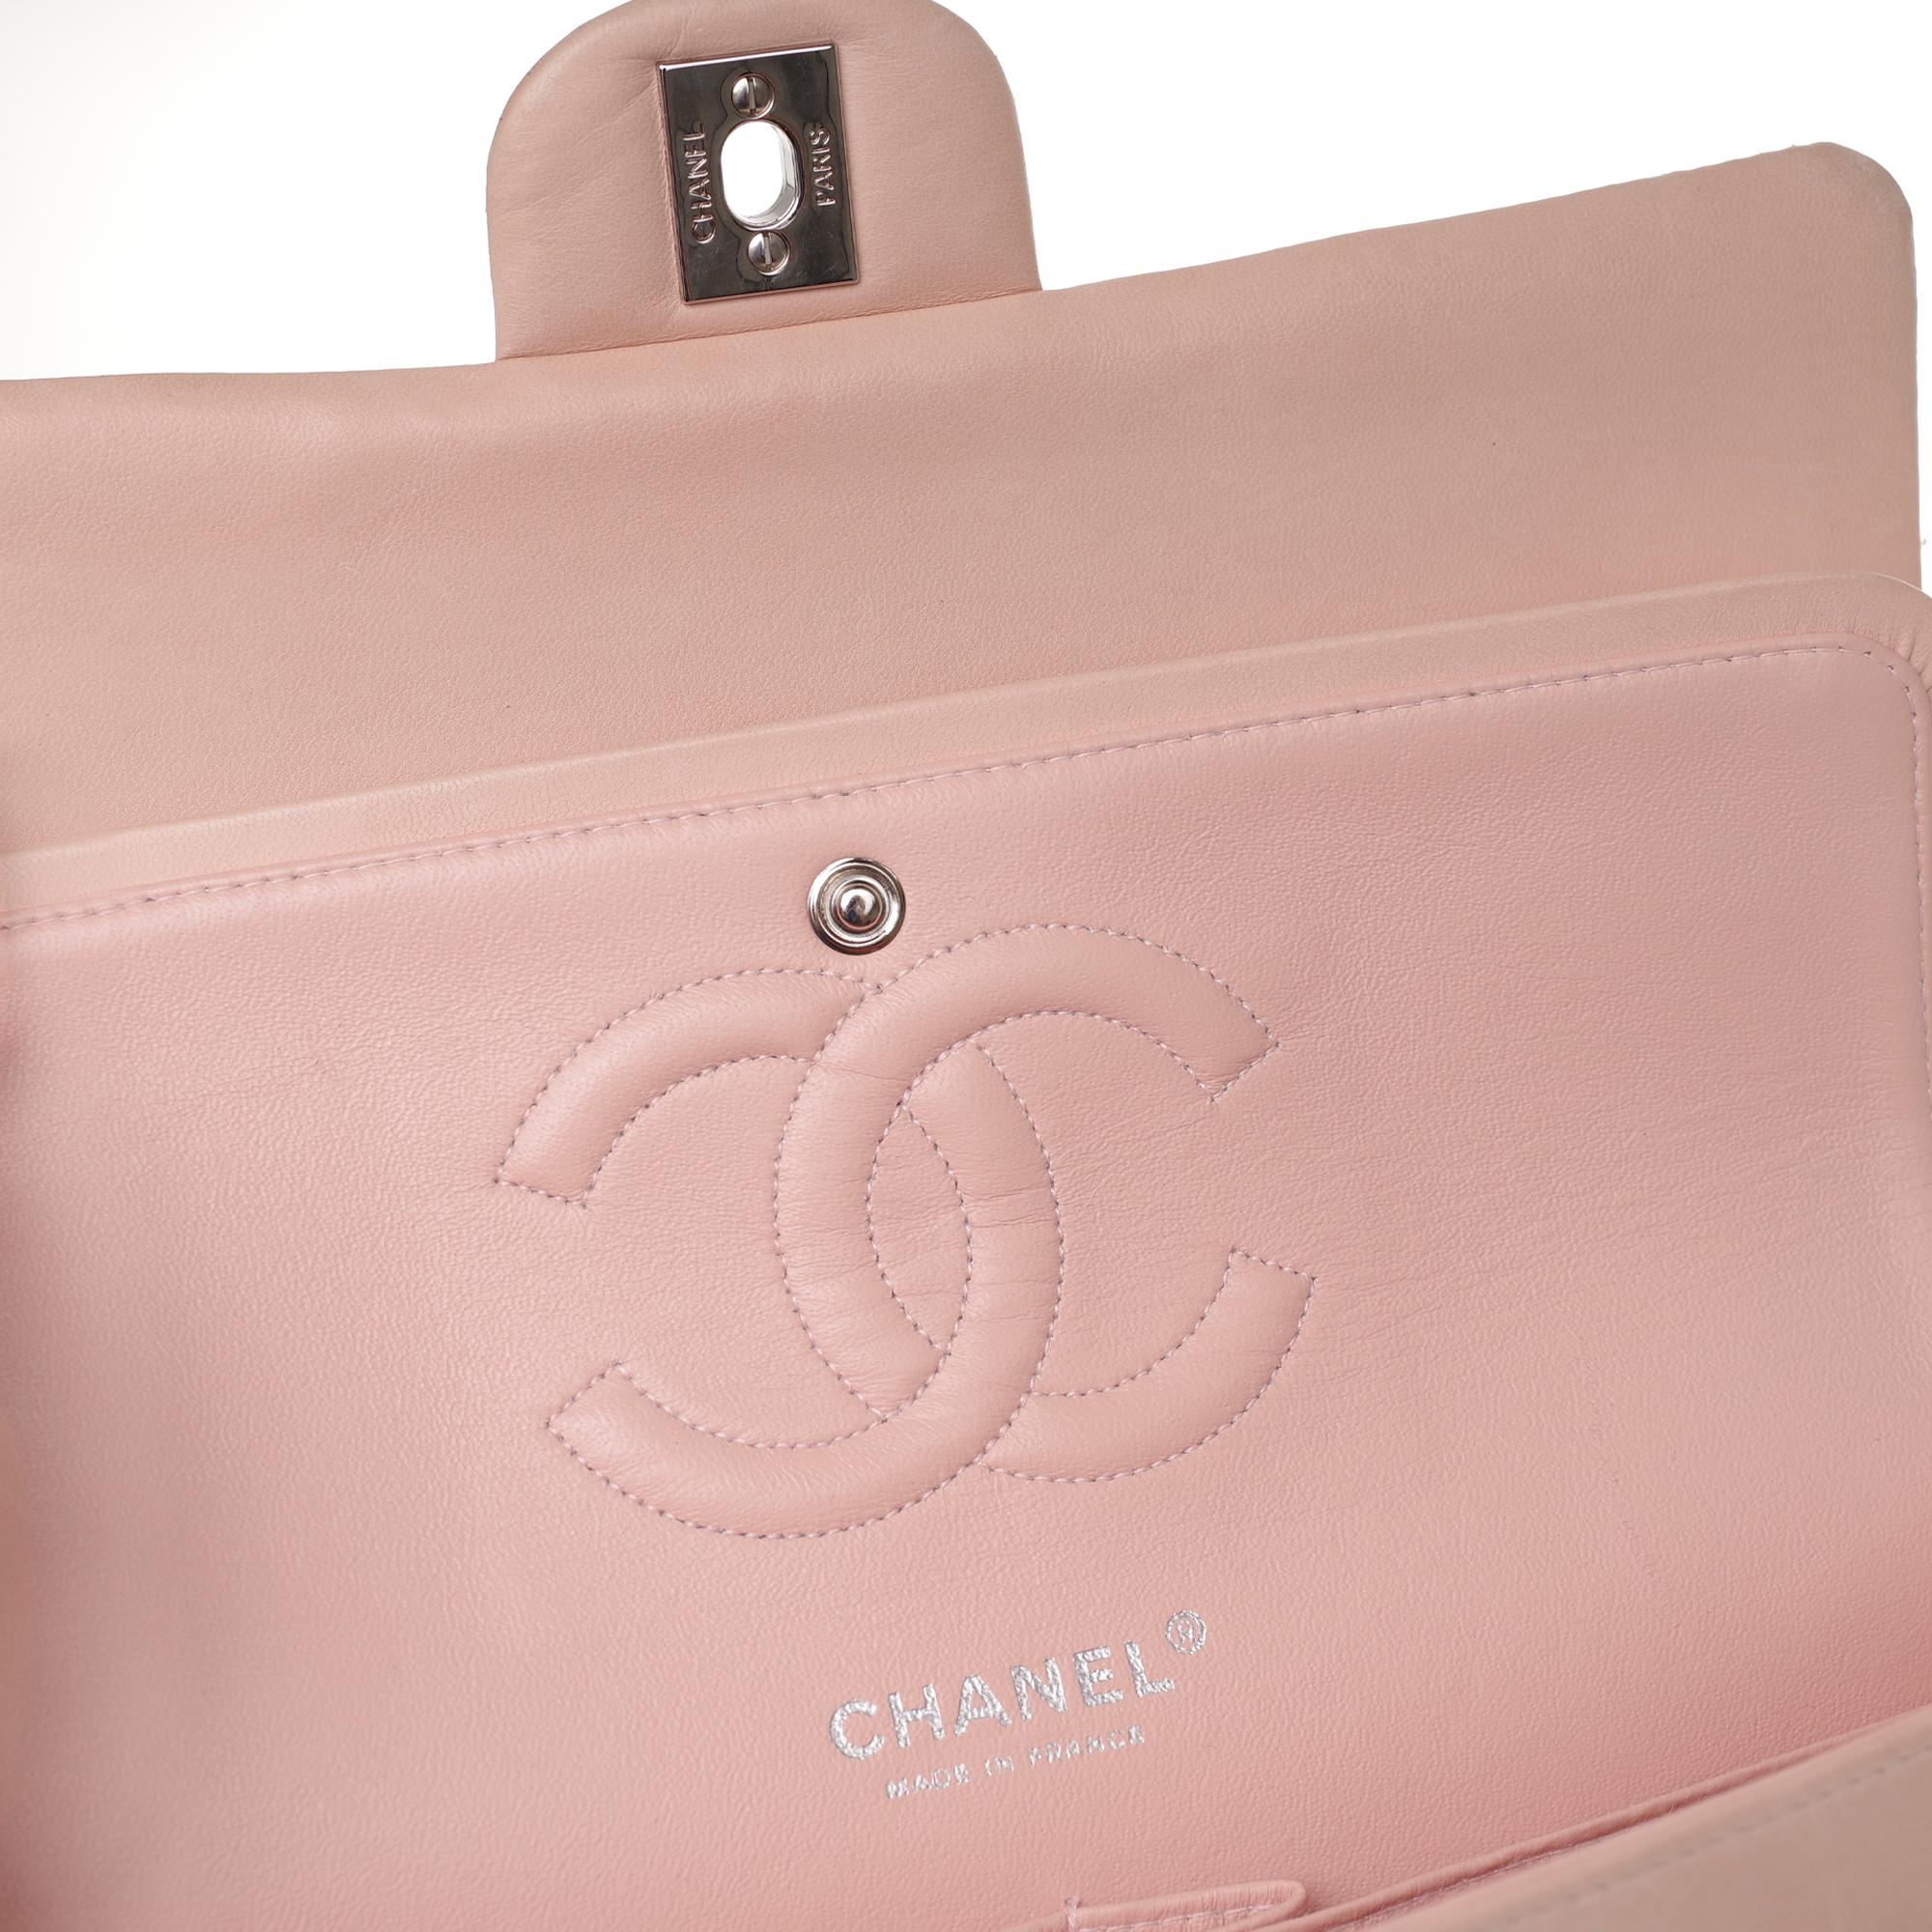 Women's Chanel Timeless medium handbag in pink quilted leather and silver hardware